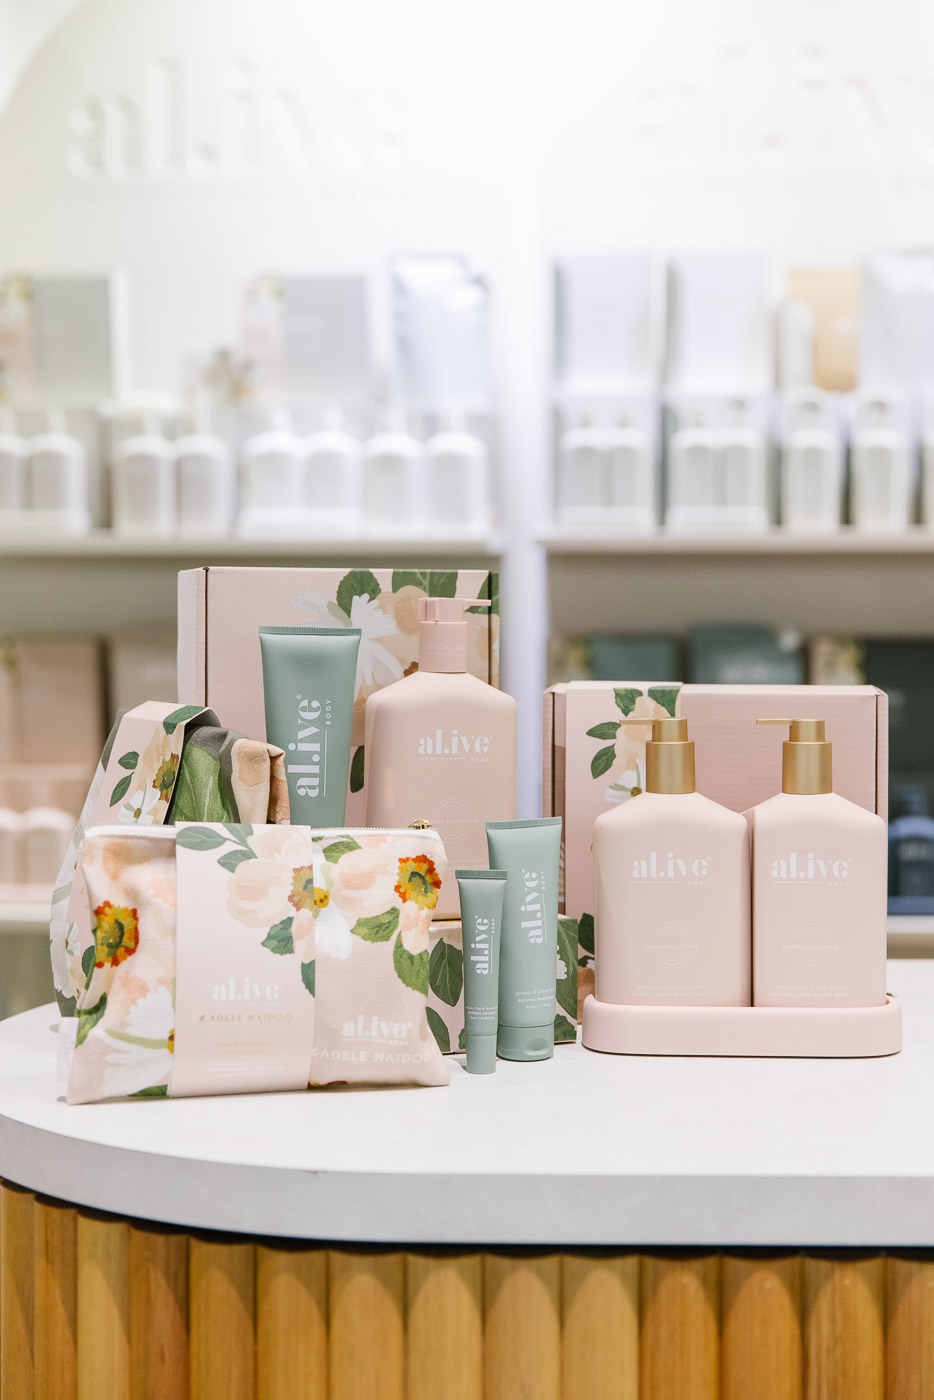 Alive Skincare on display in pastel pinks and sage greens